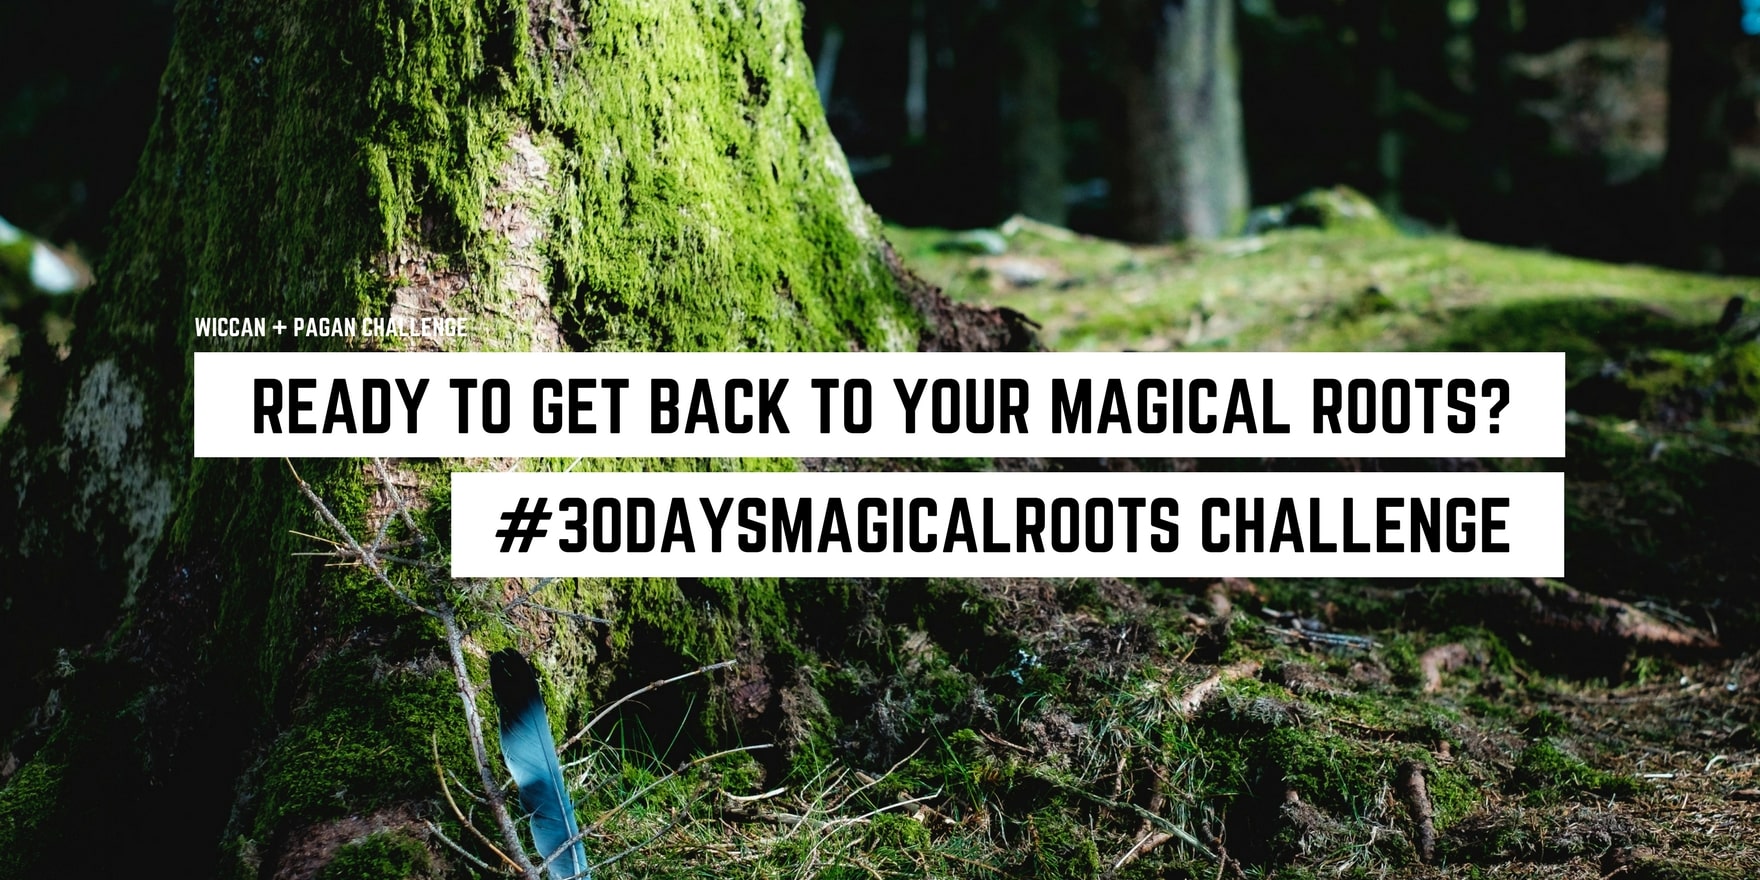 Embrace nature's enchantment: dive into the #30daysmagicalroots challenge and rediscover your mystical heritage amidst serene woodland whispers. Unveil your metaphysical connections in this spiritual journey.